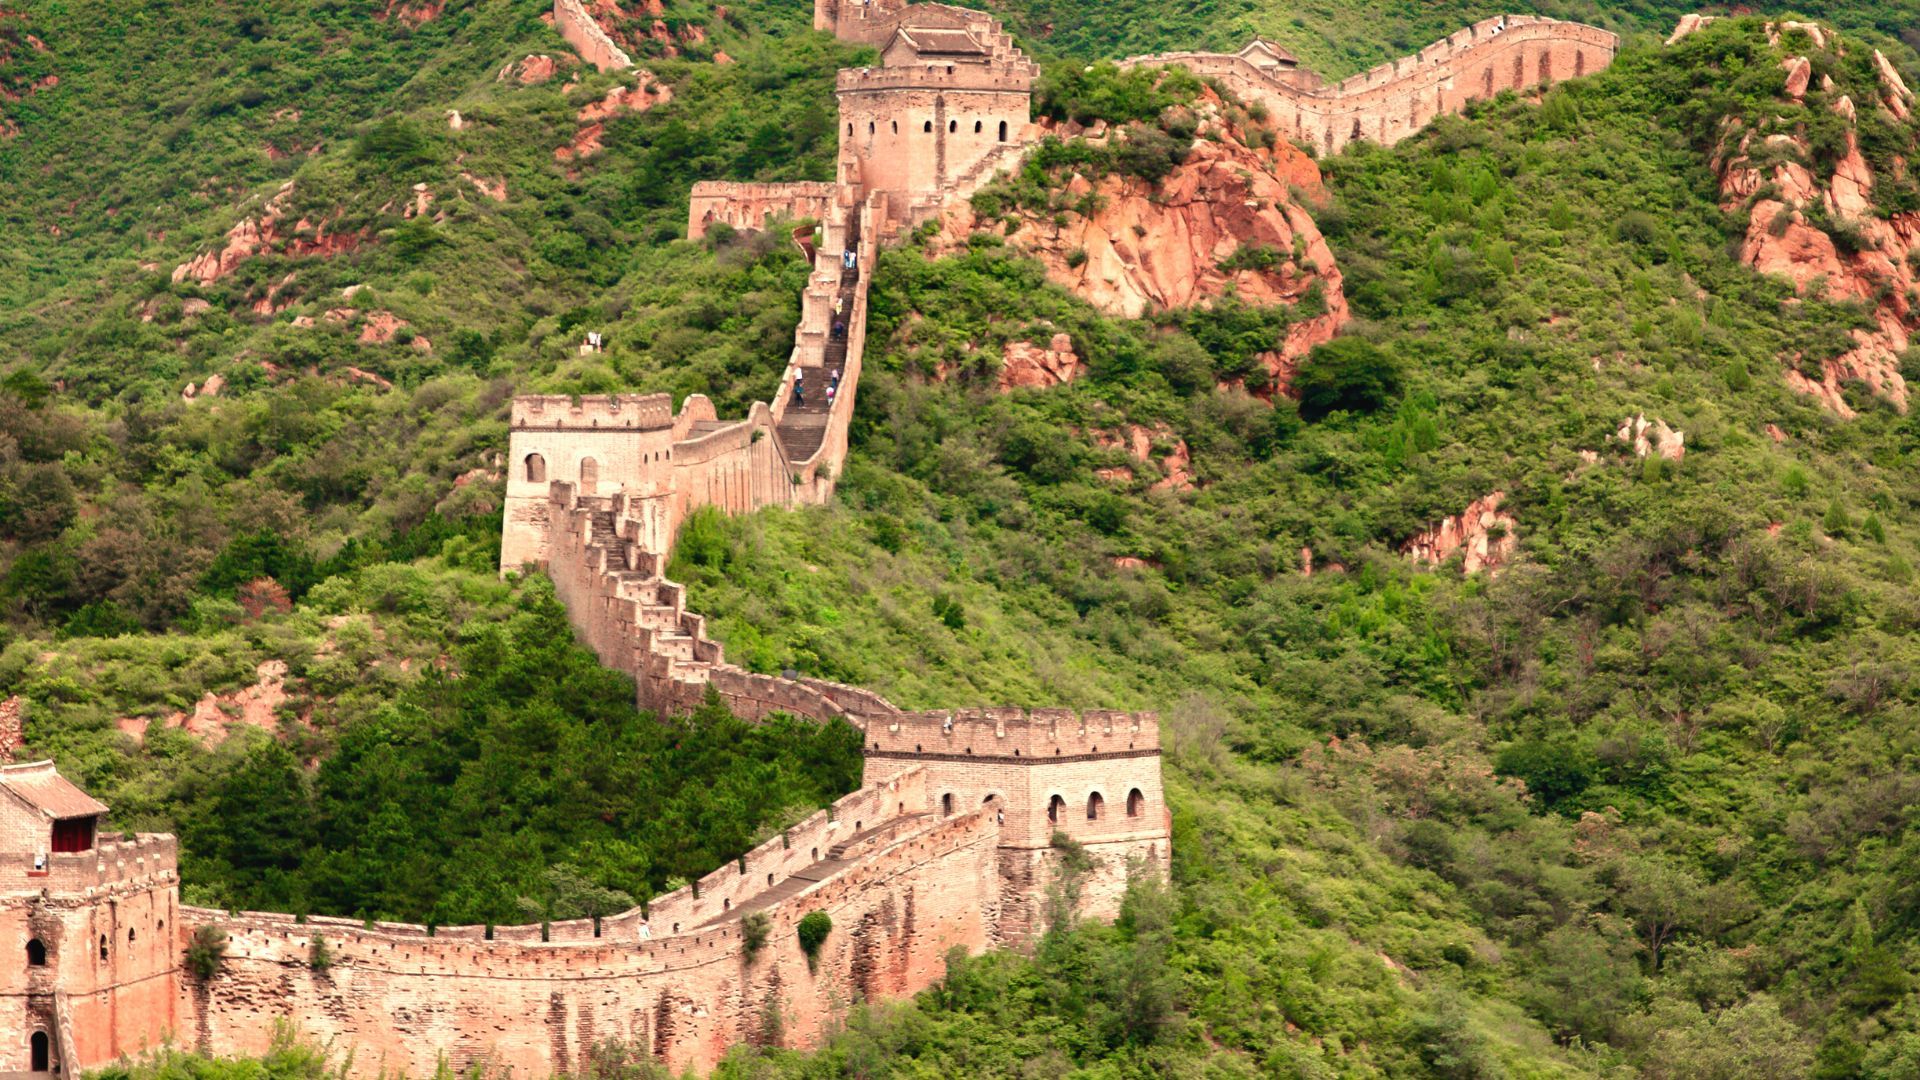 Great Wall of China, Definition, History, Length, Map, Location, & Facts